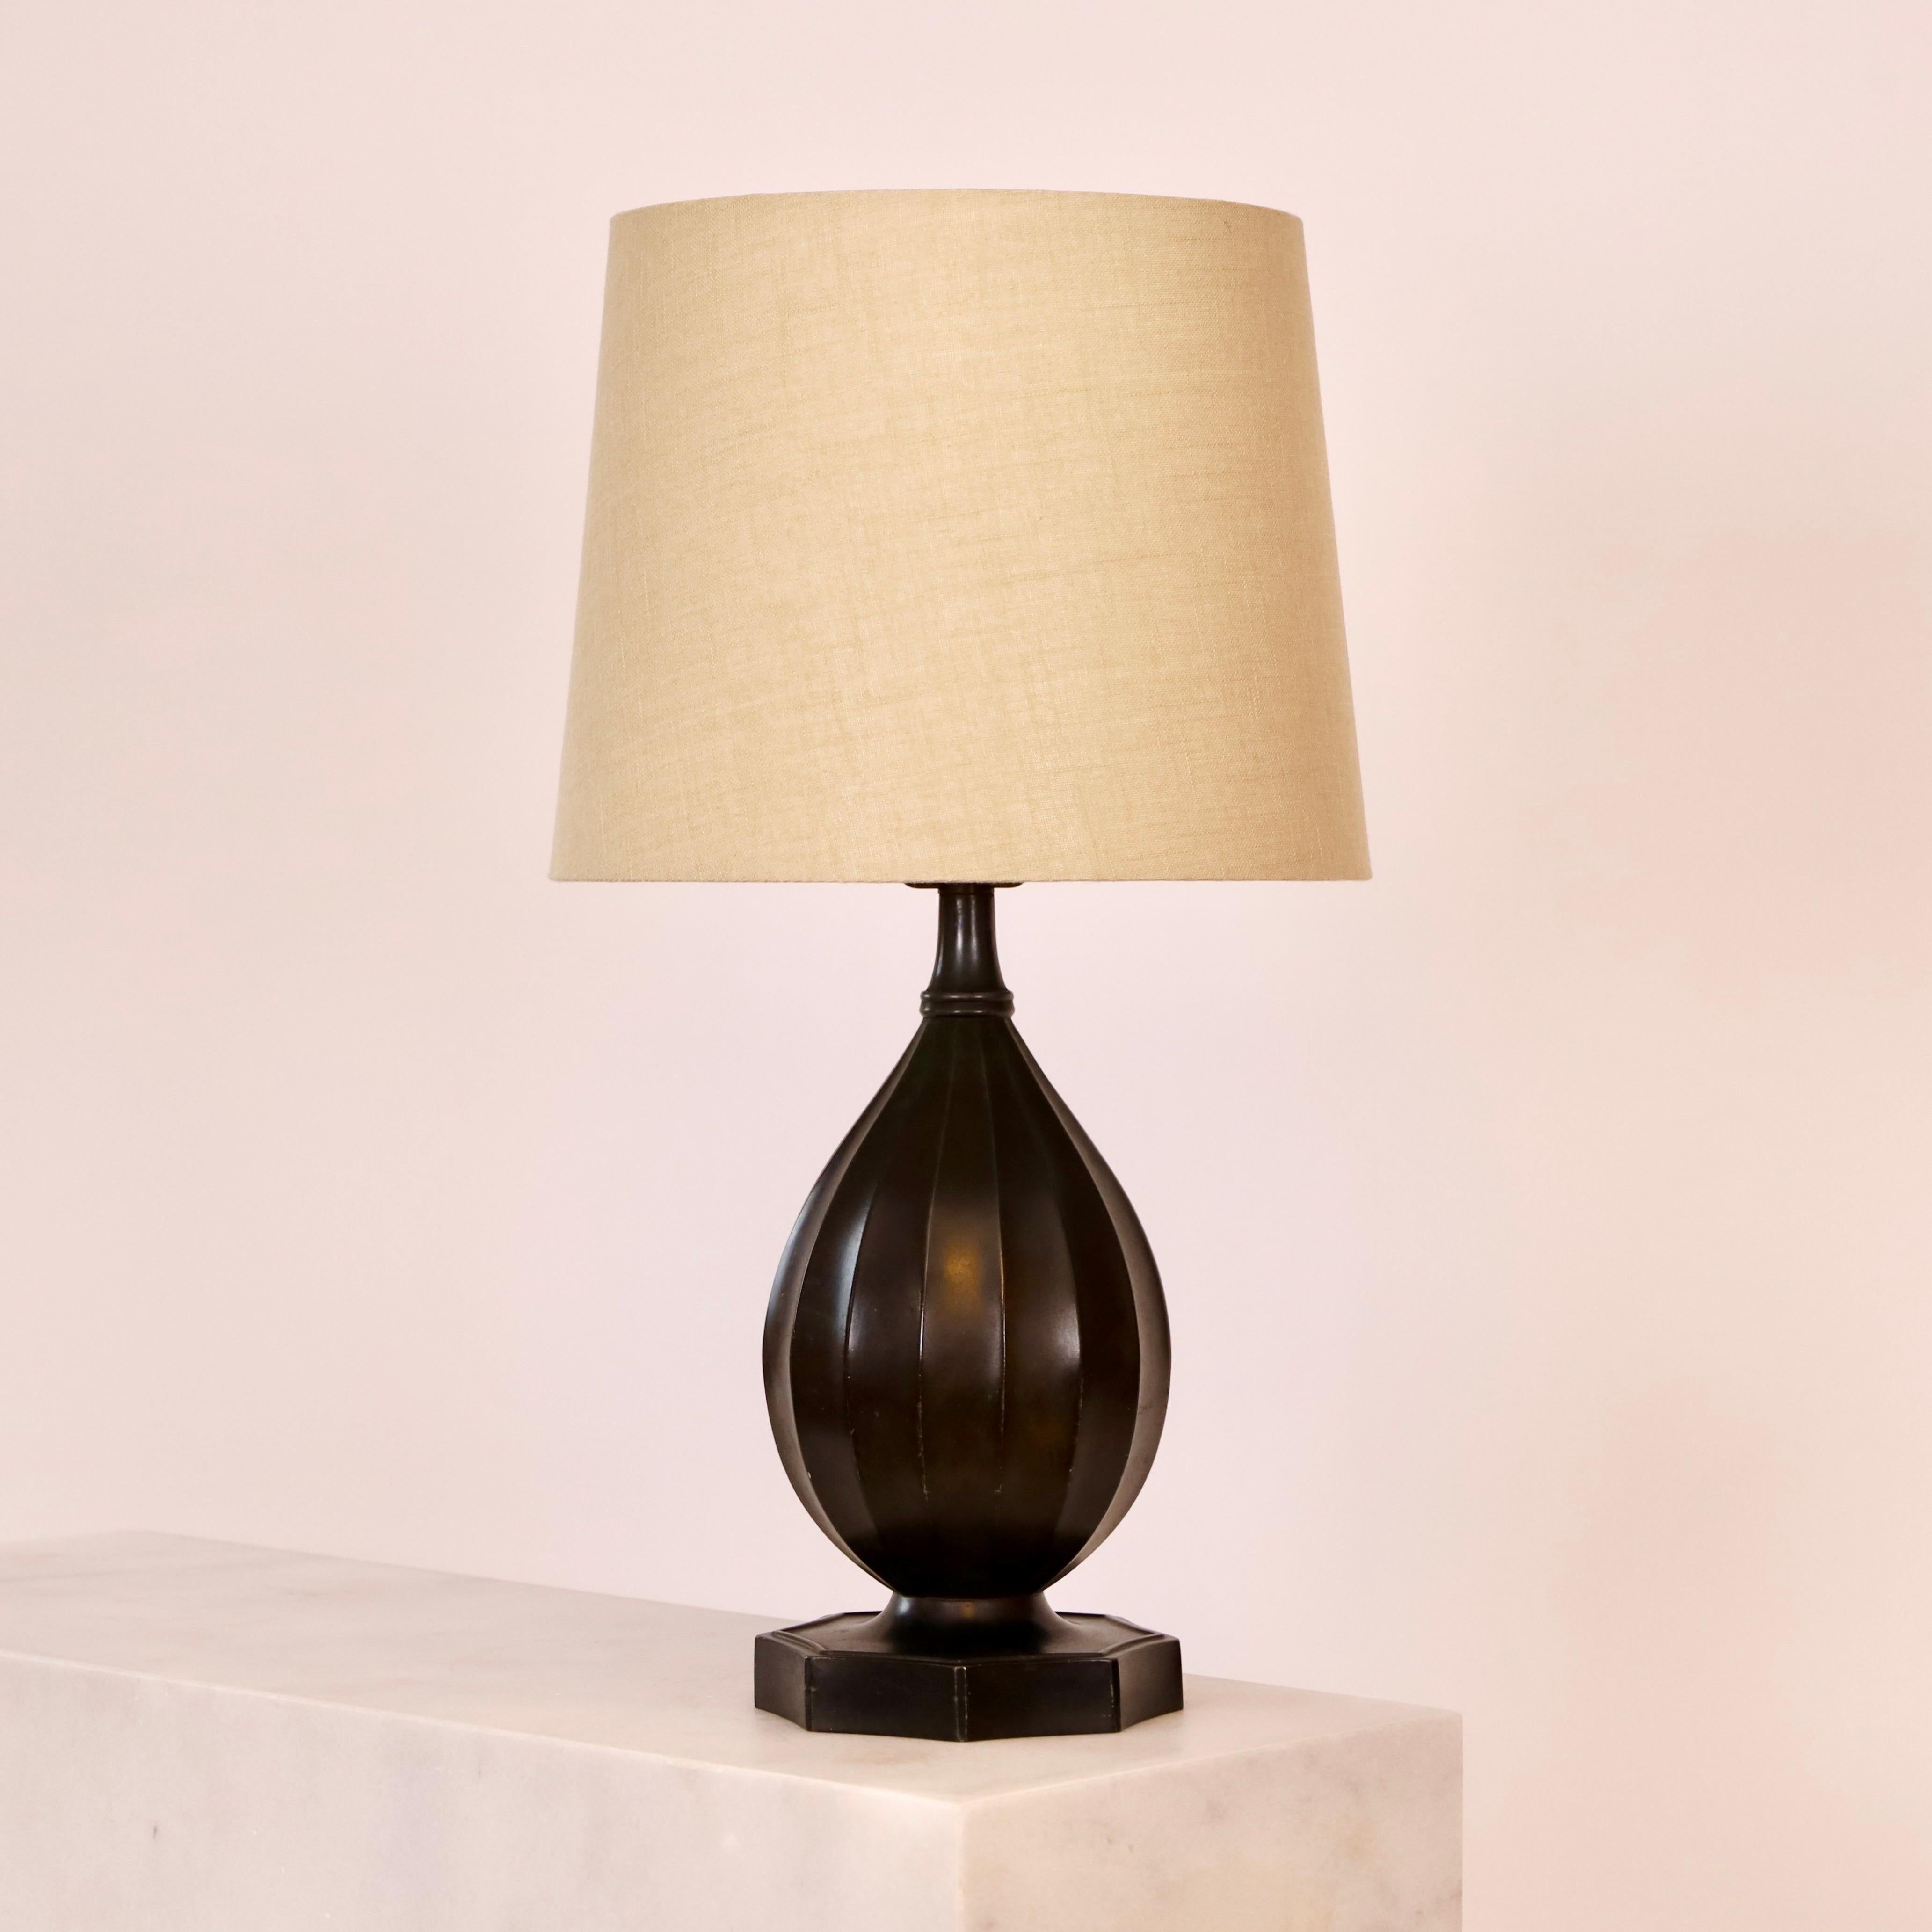 A timeless table lamp by Just Andersen in 1936 in a rare good condition. A center piece for a beautiful home.  

* Bottle-shaped metal desk lamp with vertical lines and a beige fabric shade.
* Designer: Just Andersen
* Model: 1860 
* Year: 1936
*